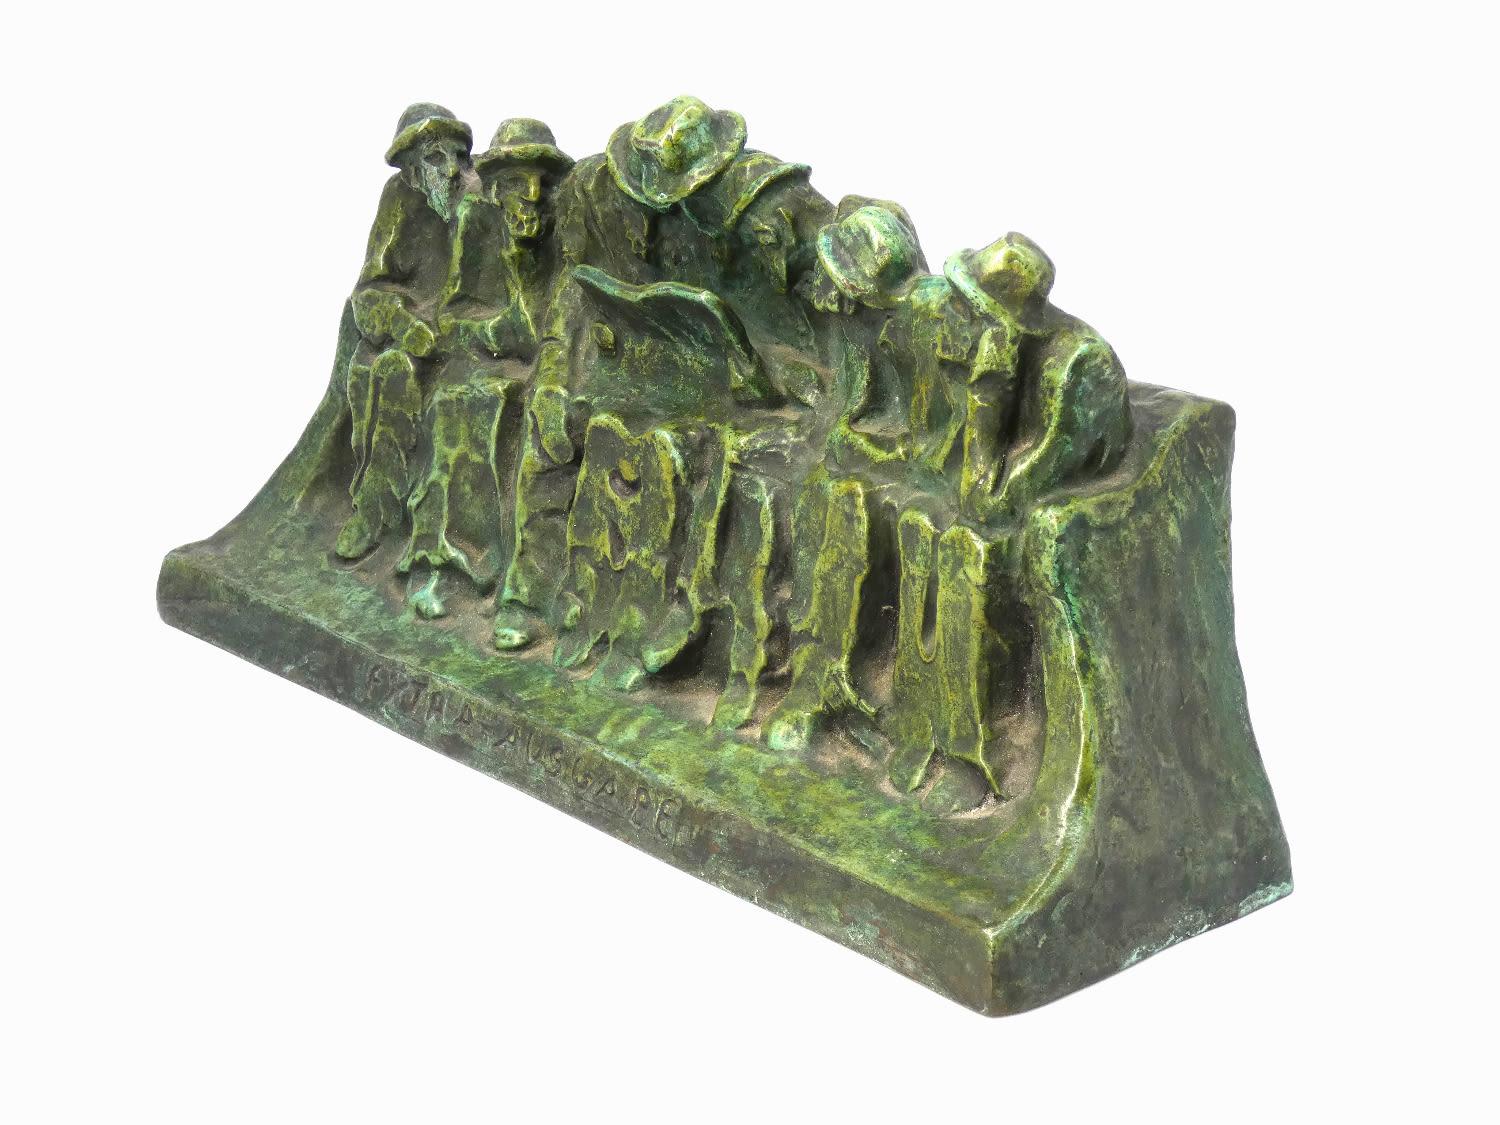 HÉLÈNE ZELEZNY-SCHOLTZ (1882-1974). A bronze sculpture “Reading of the newspaper”, 1915.

A man reads the newspaper for six other men sitting on a bench. The inscription on the base reads “special edition” (Extra- Ausgabe). 1915 has seen intense